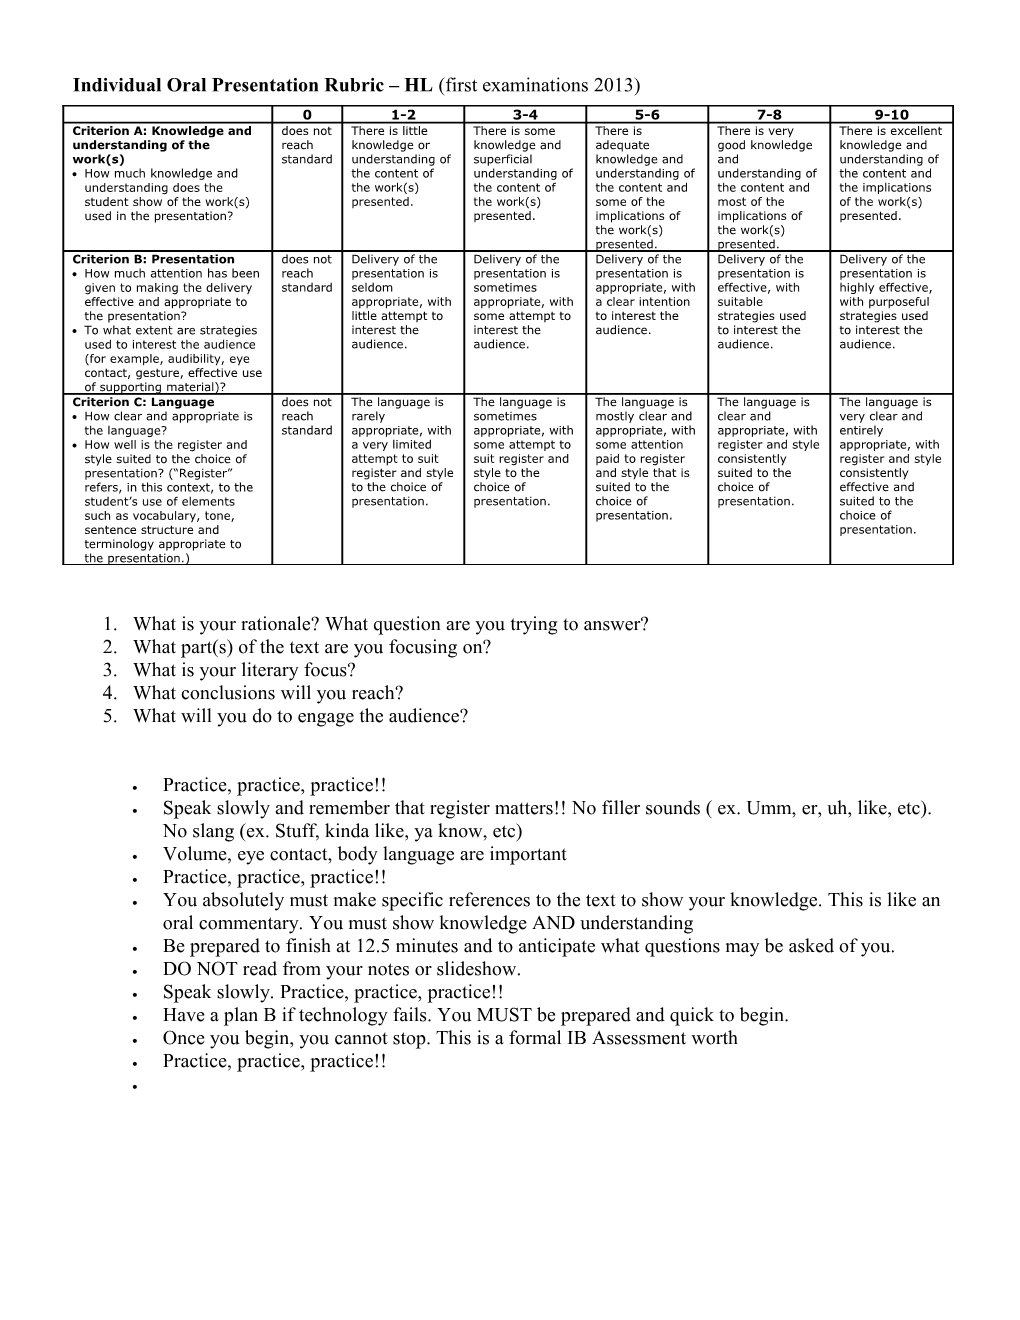 IOP Rubric (For Exams 2013)